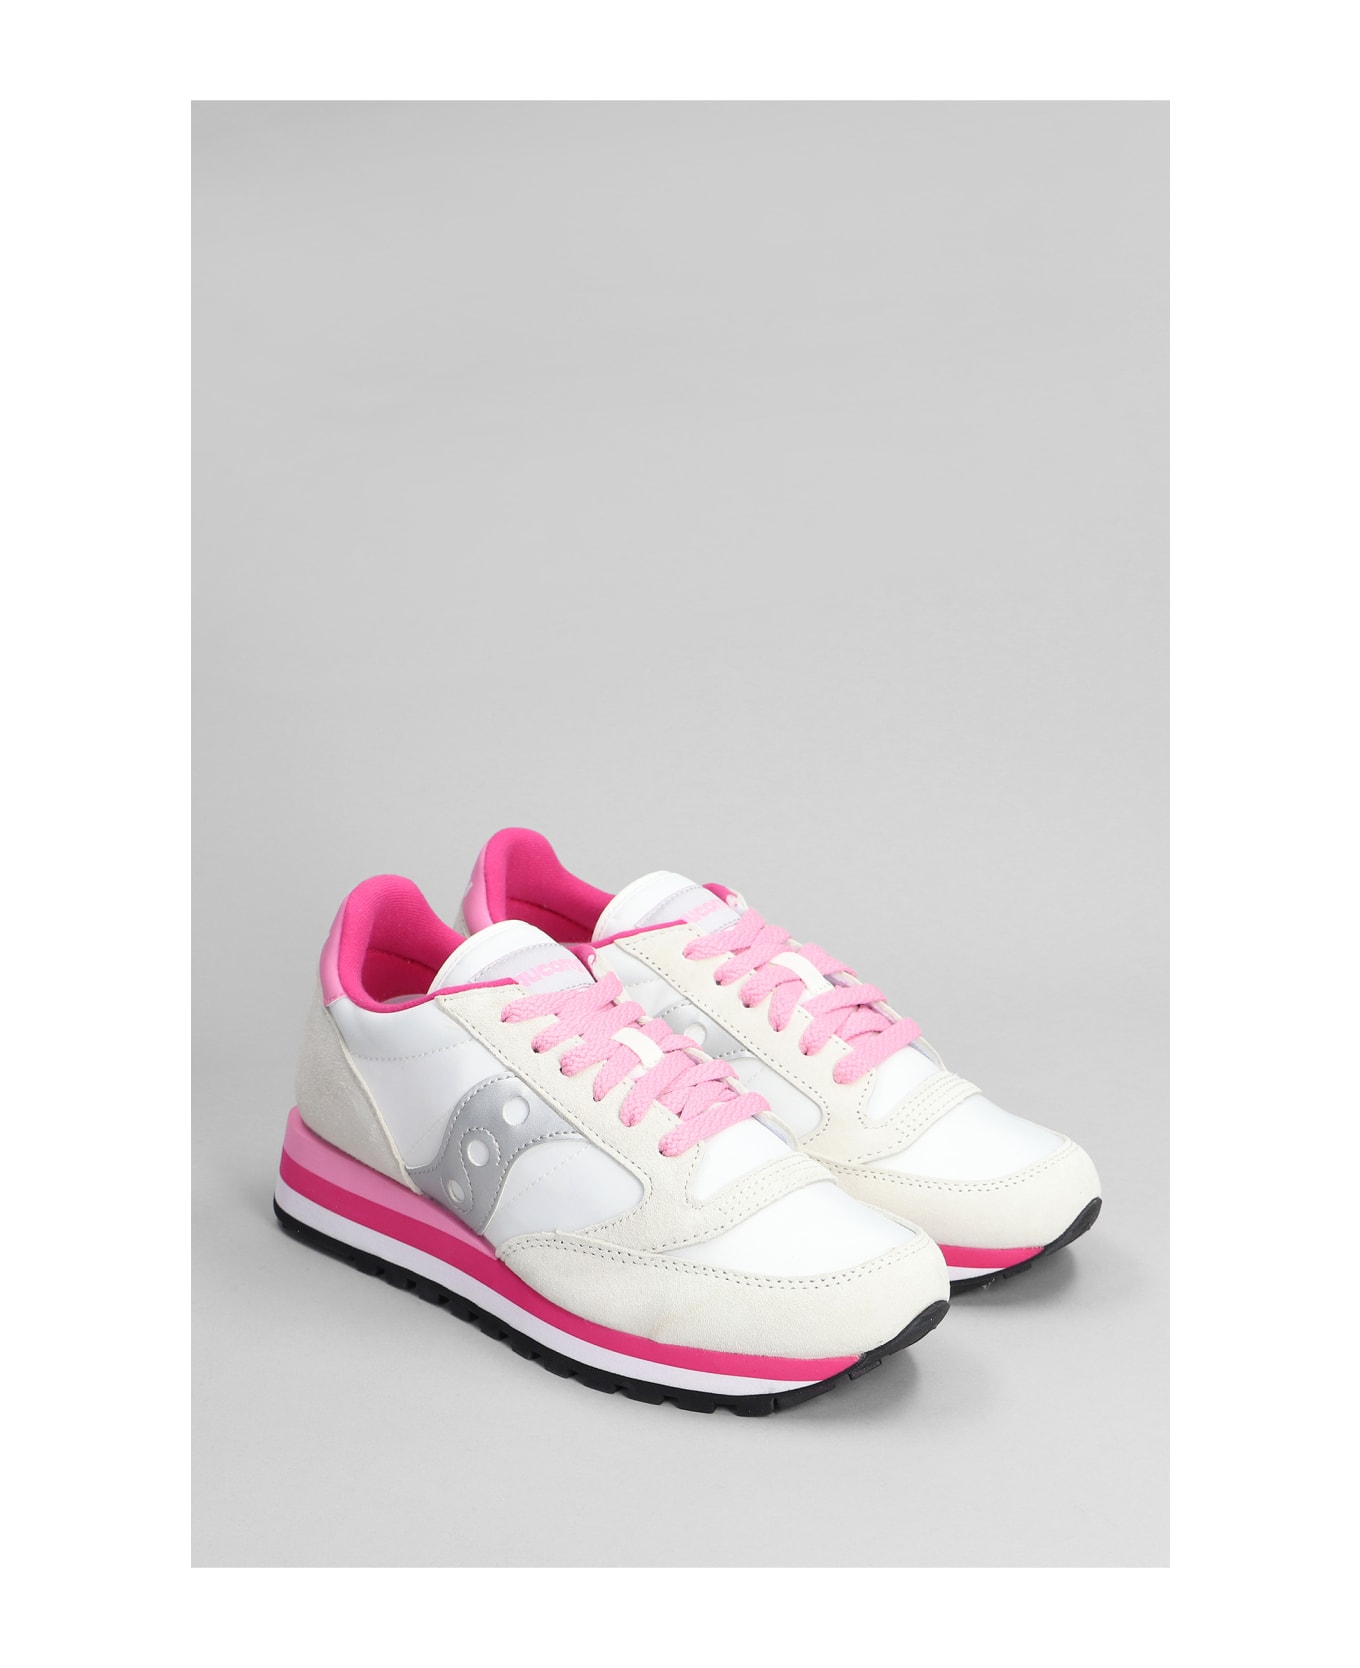 Saucony Jazz Triple Sneakers In White Suede And Fabric - White/gray/pink ウェッジシューズ